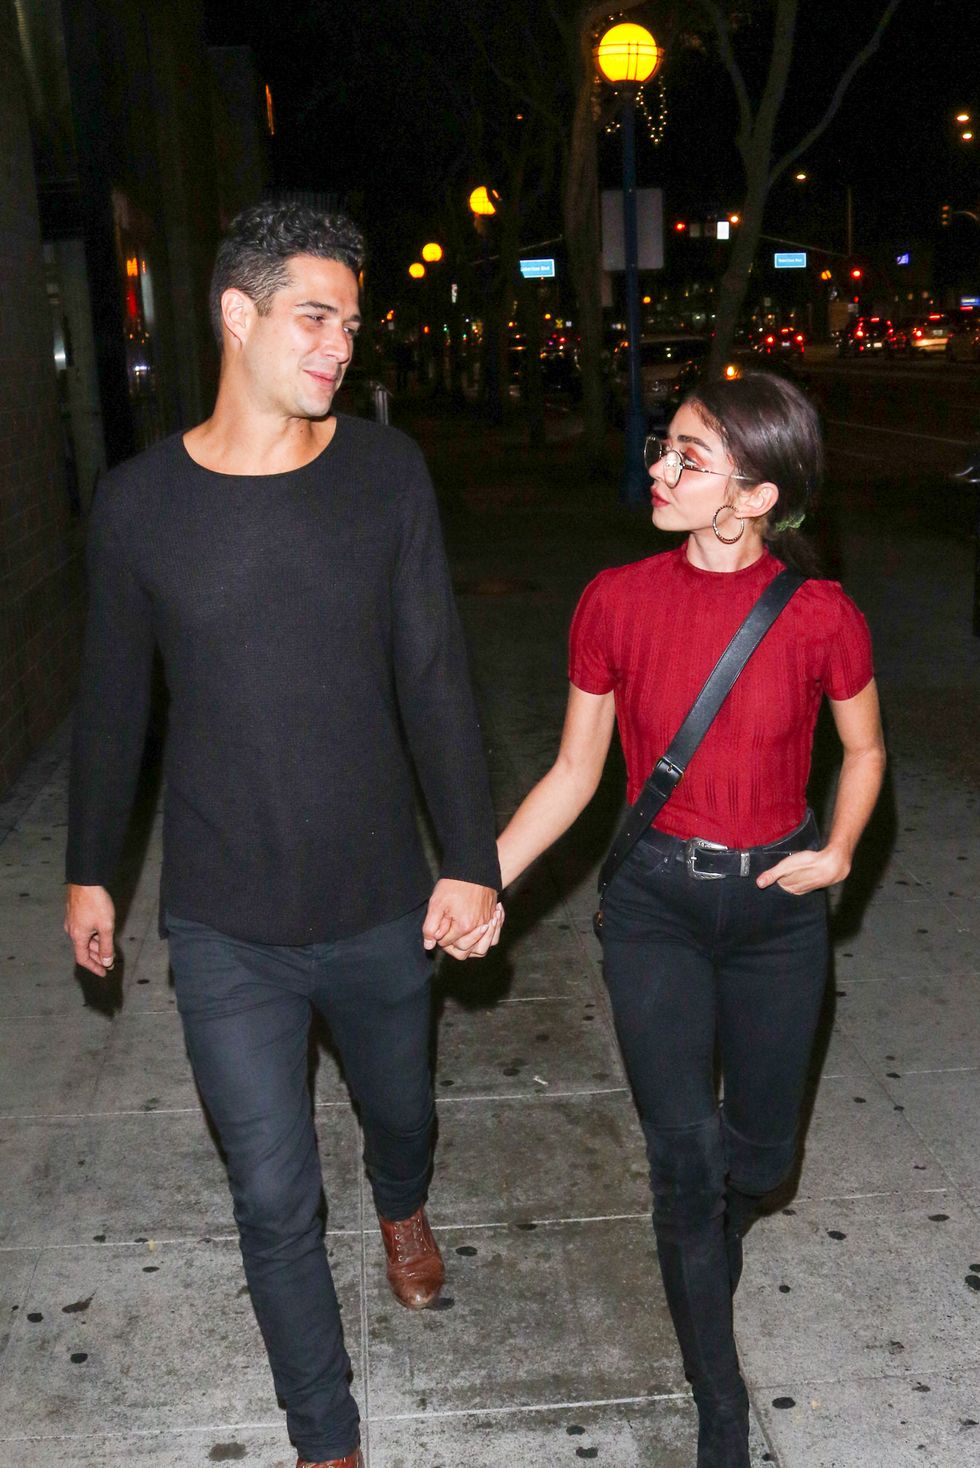 Sarah Hyland And Wells Adams Are Seen On November 19 2018 News Photo 1568751458 ?crop=0.808xw 0.908xh;0.0952xw,0.0931xh&resize=980 *